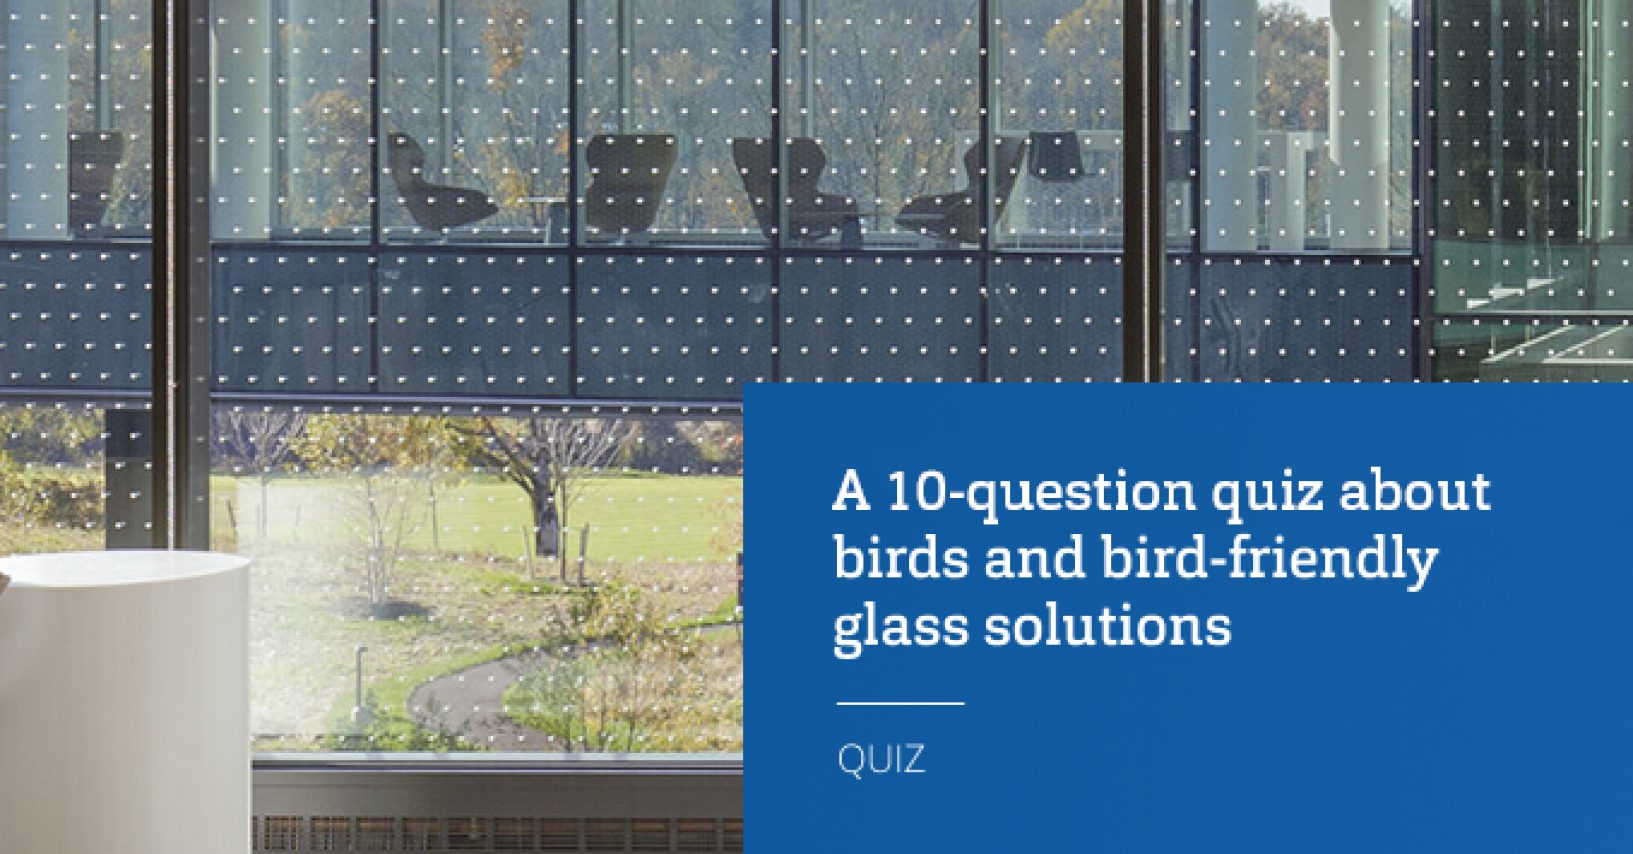 Test your knowledge about bird friendly glass solutions